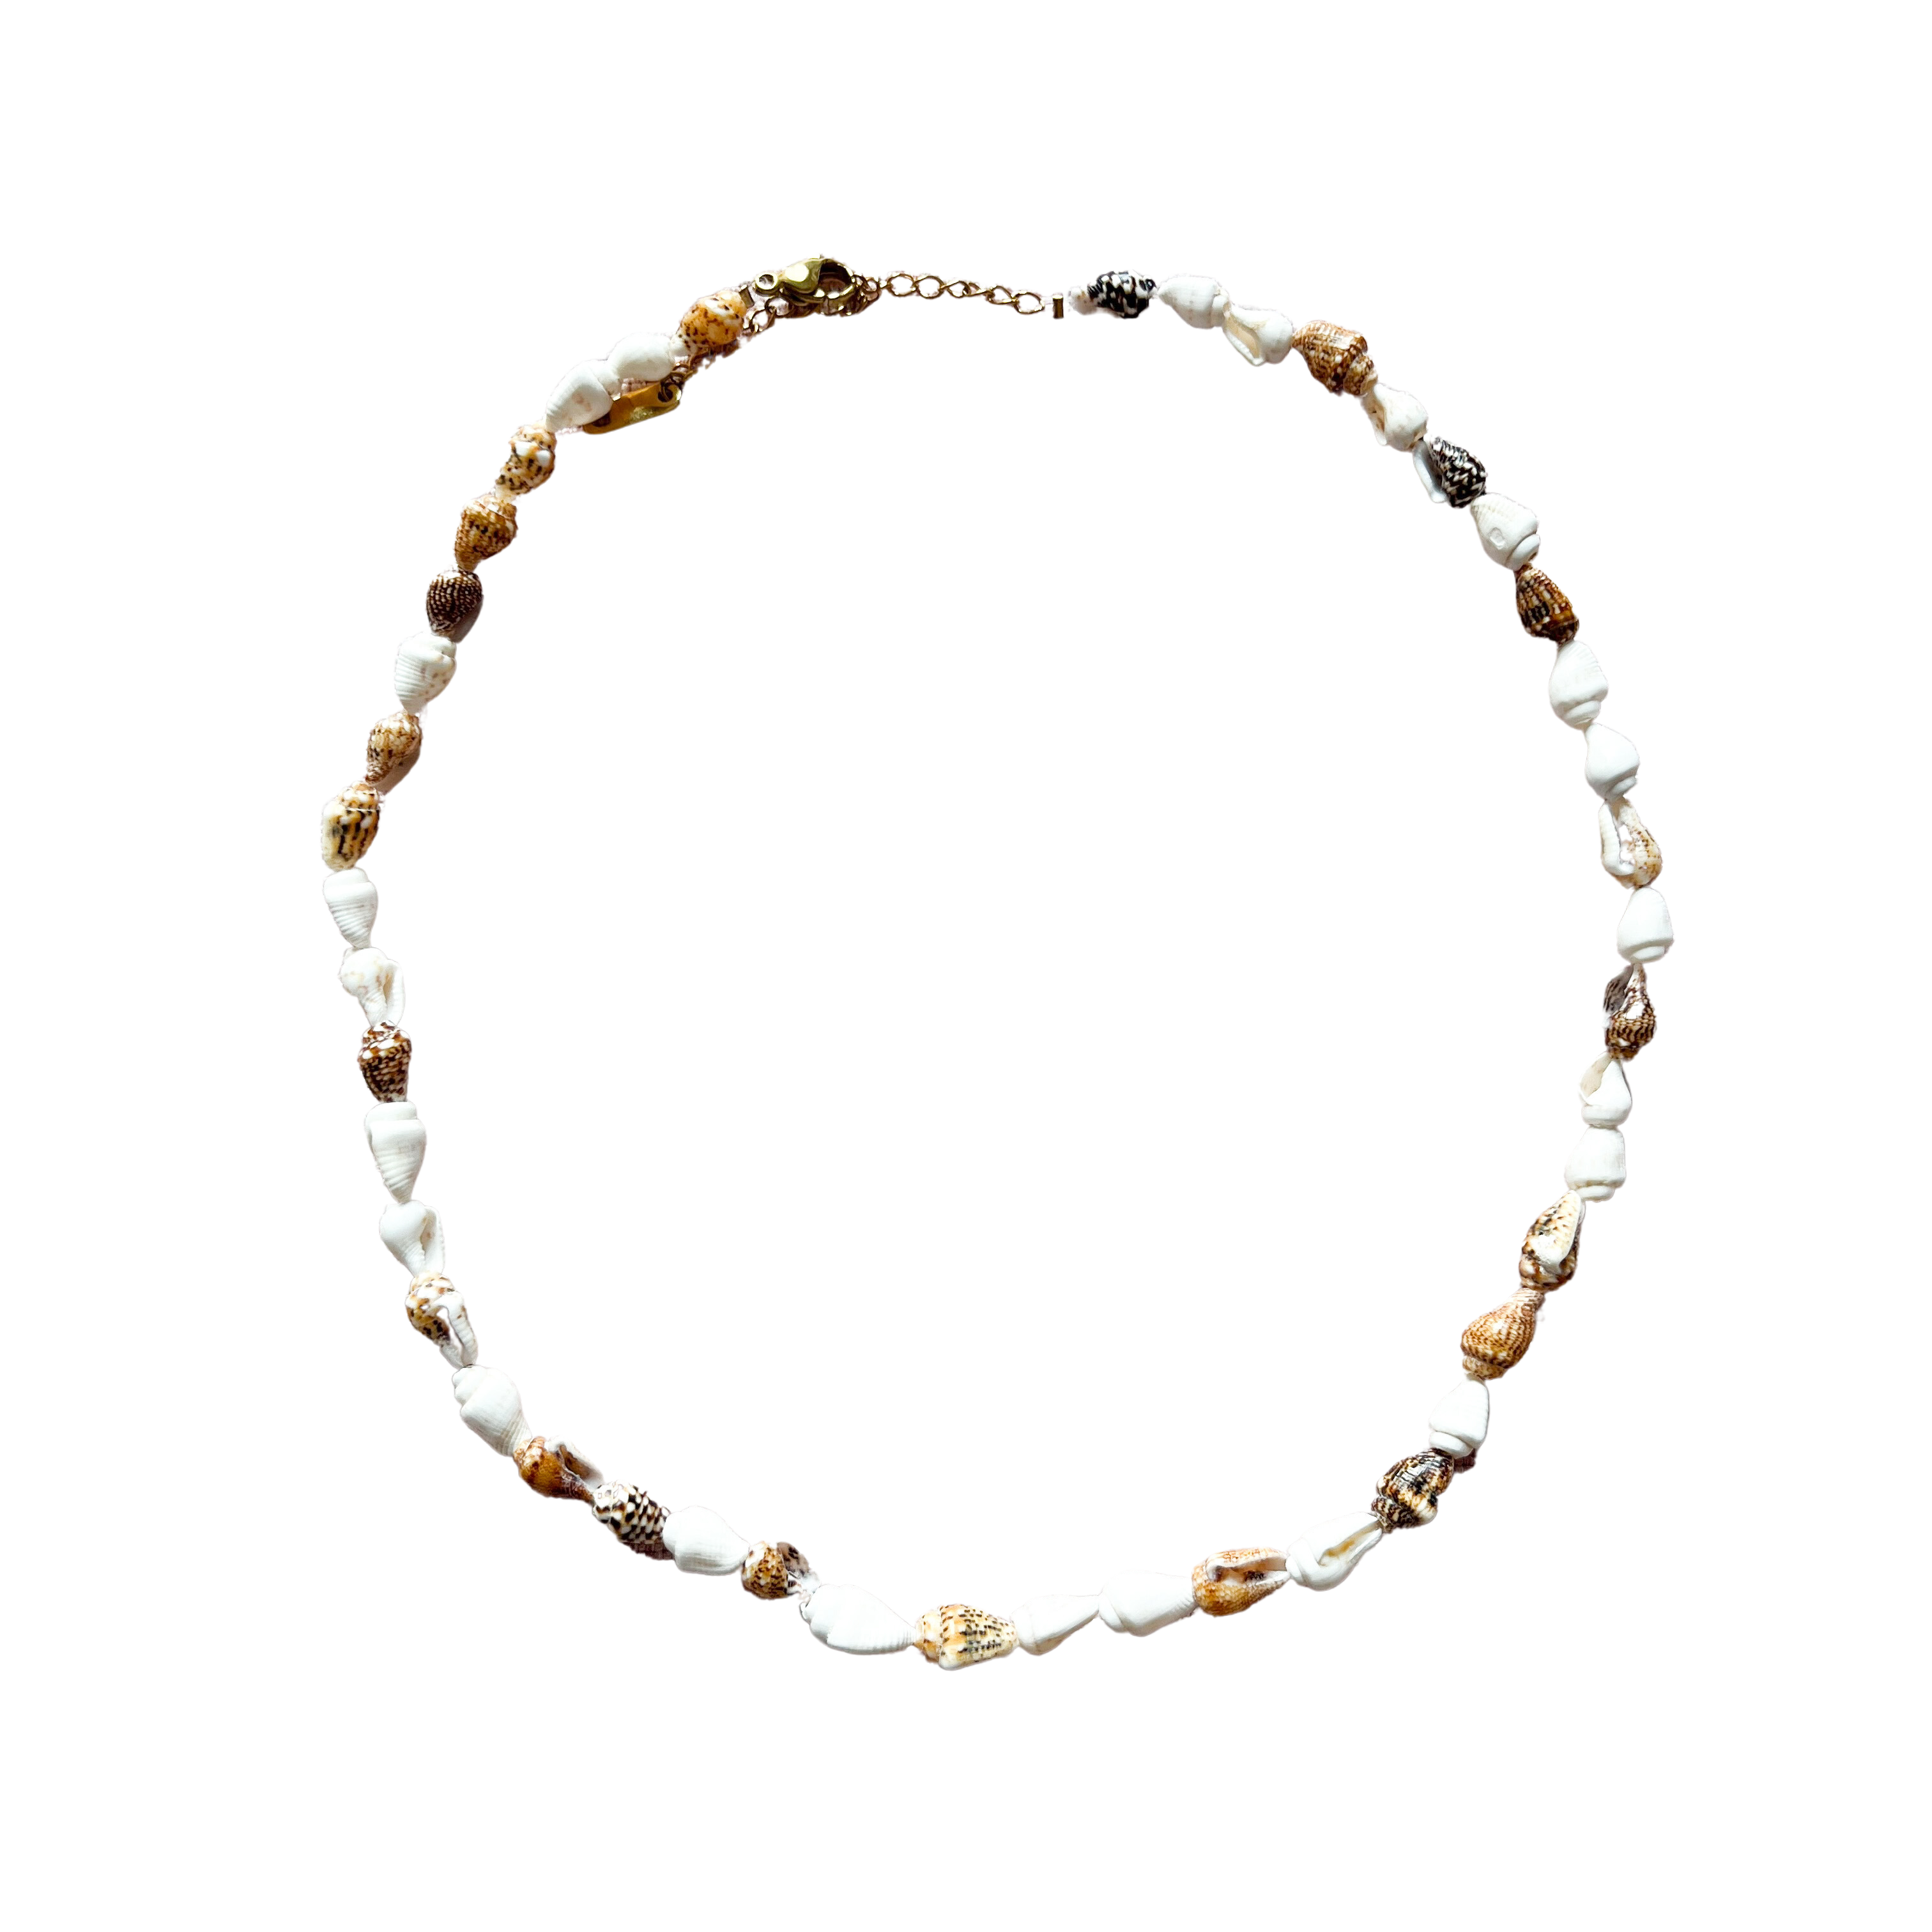 Seashell Necklace brown-white